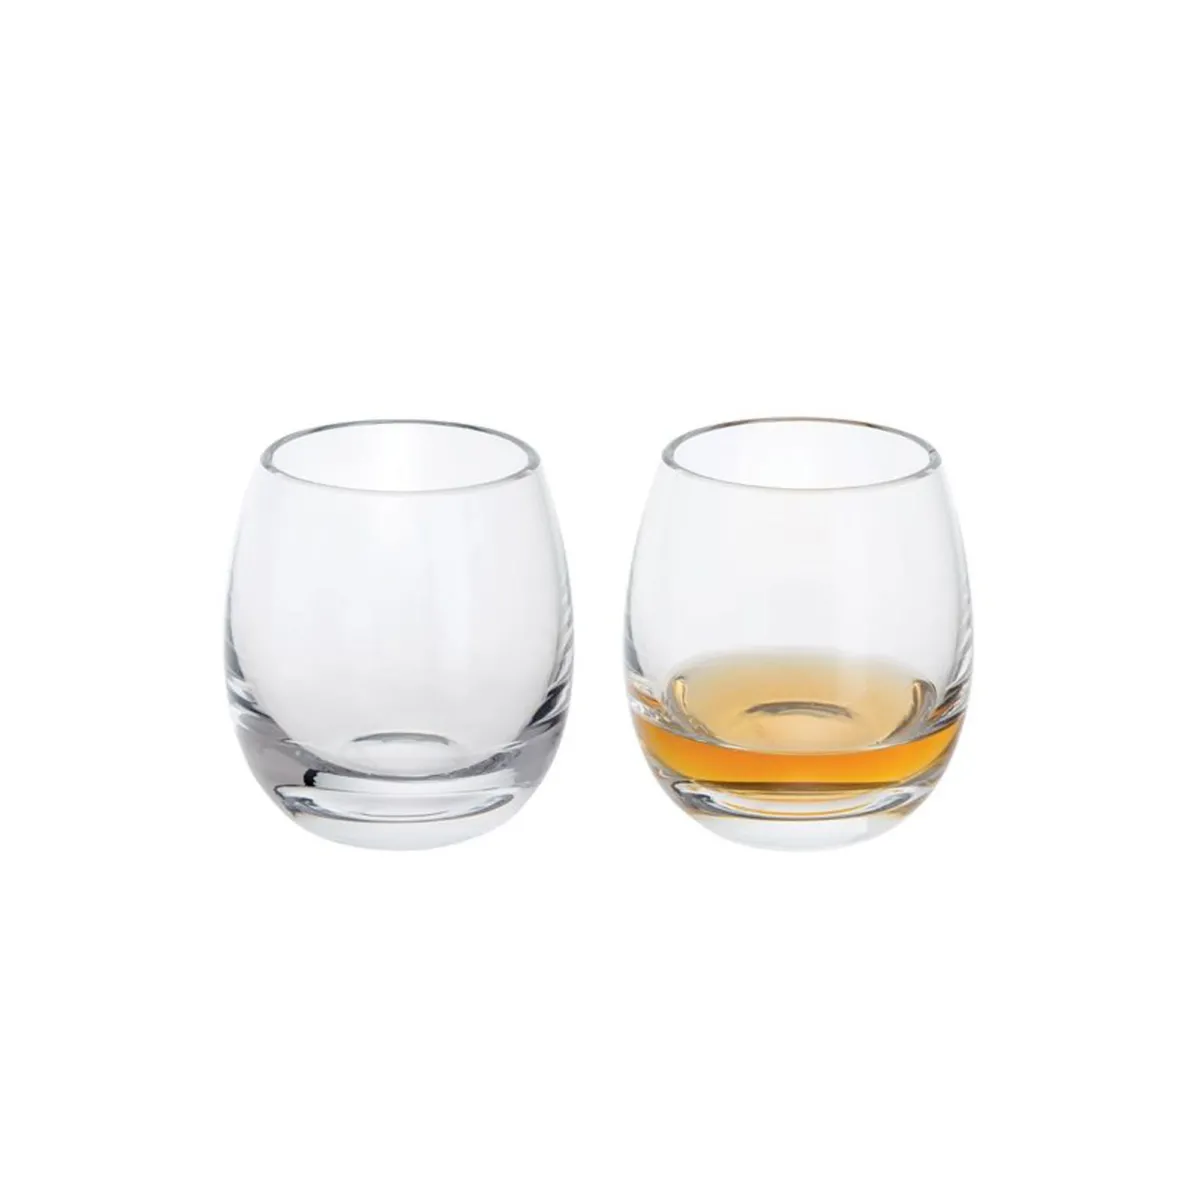 Picture of Crystal Whisky dram glasses